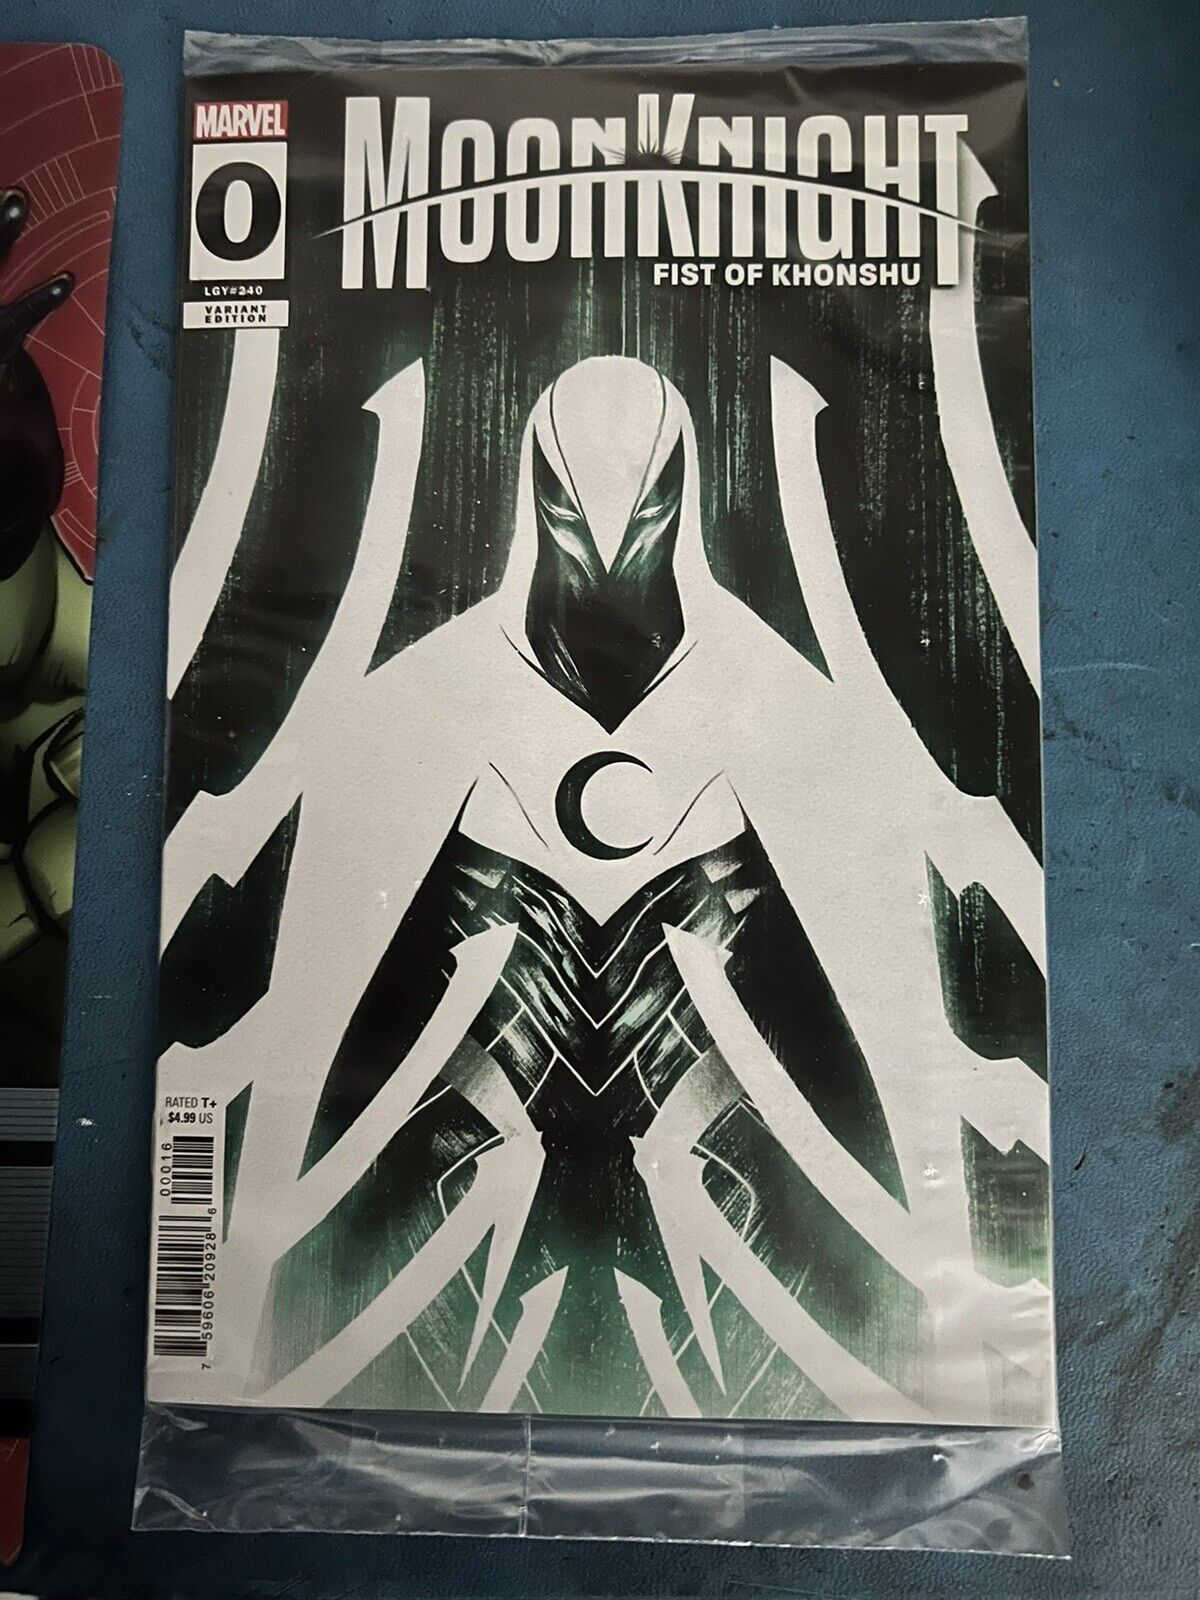 MOON KNIGHT FIST OF KHONSHU #0 CAPPUCCIO SURPRISE VAR (Polybagged) PRESALE 7/3